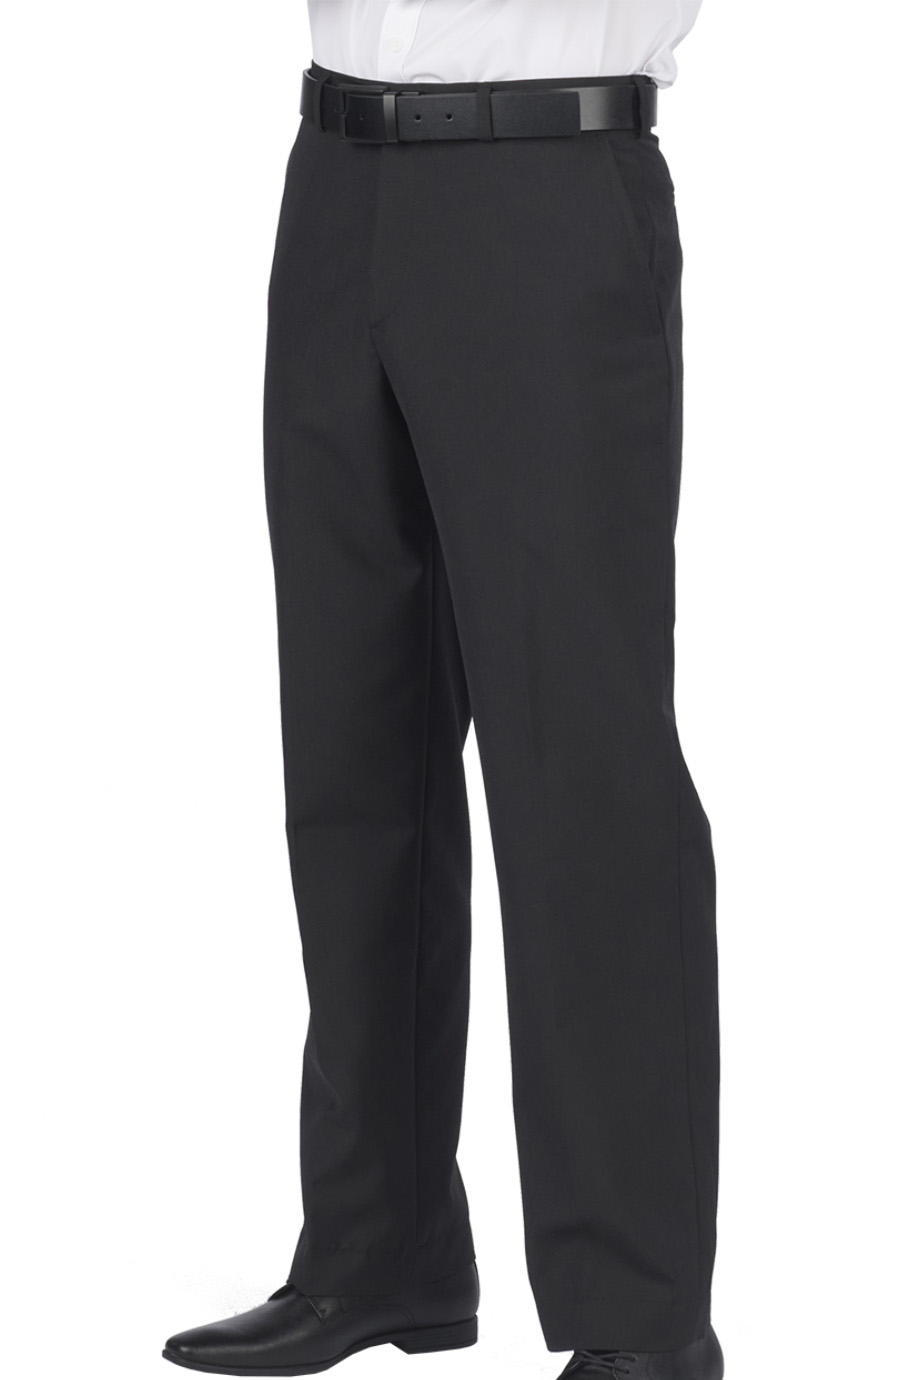 WASHABLE WOOL FLAT FRONT PANT